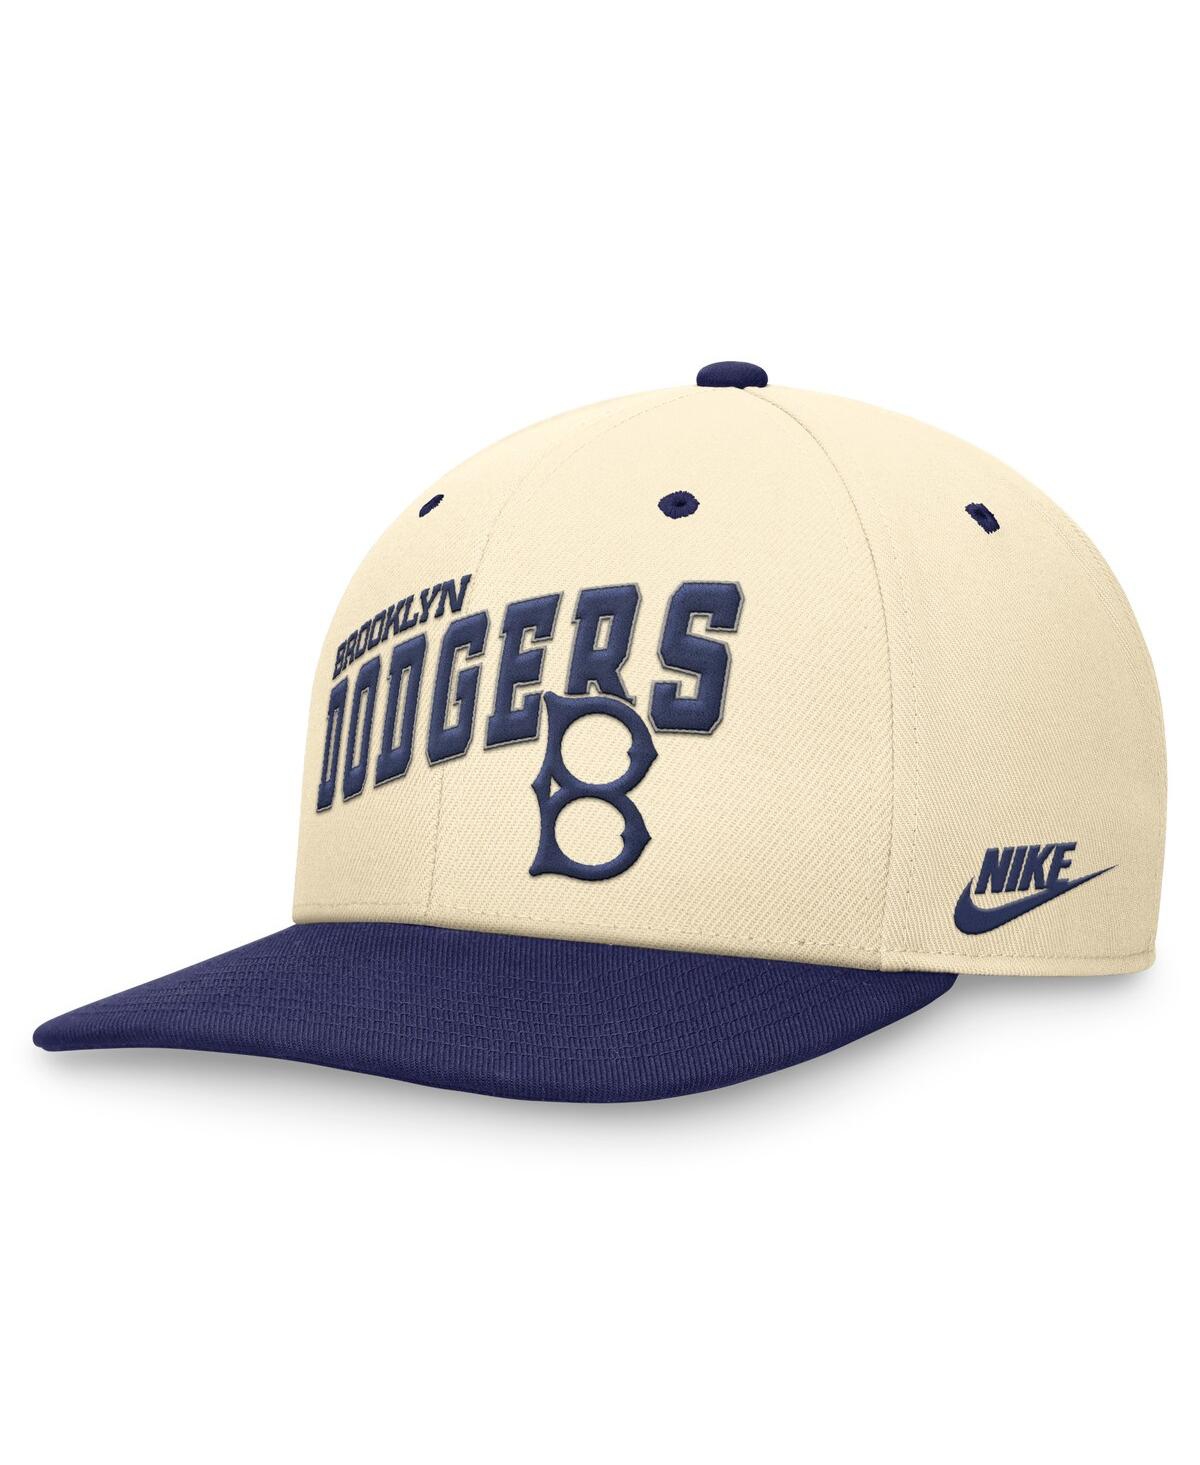 Shop Nike Men's Cream/royal Brooklyn Dodgers Rewind Cooperstown Collection Performance Snapback Hat In Coconloyal